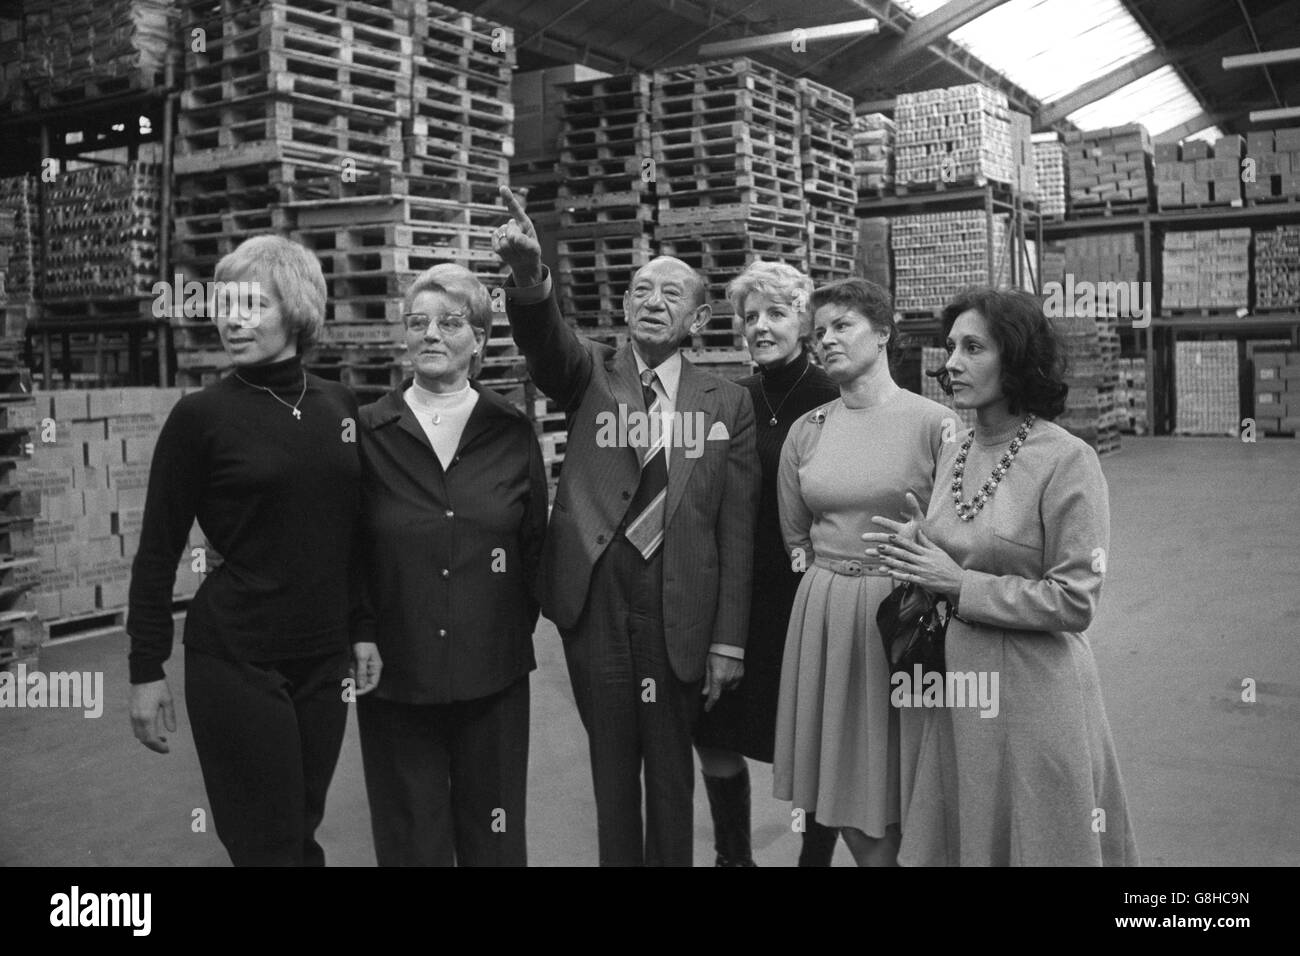 Five members of the National Housewives Association look for sugar at the warehouse of Tesco, at the invitation of its head, Sir John Cohen. (l-r) Annie Kenney, Gladys Moore, Sir John Cohen, Cynthia Stein, Betty Stevens and Sandra Brookes. Stock Photo